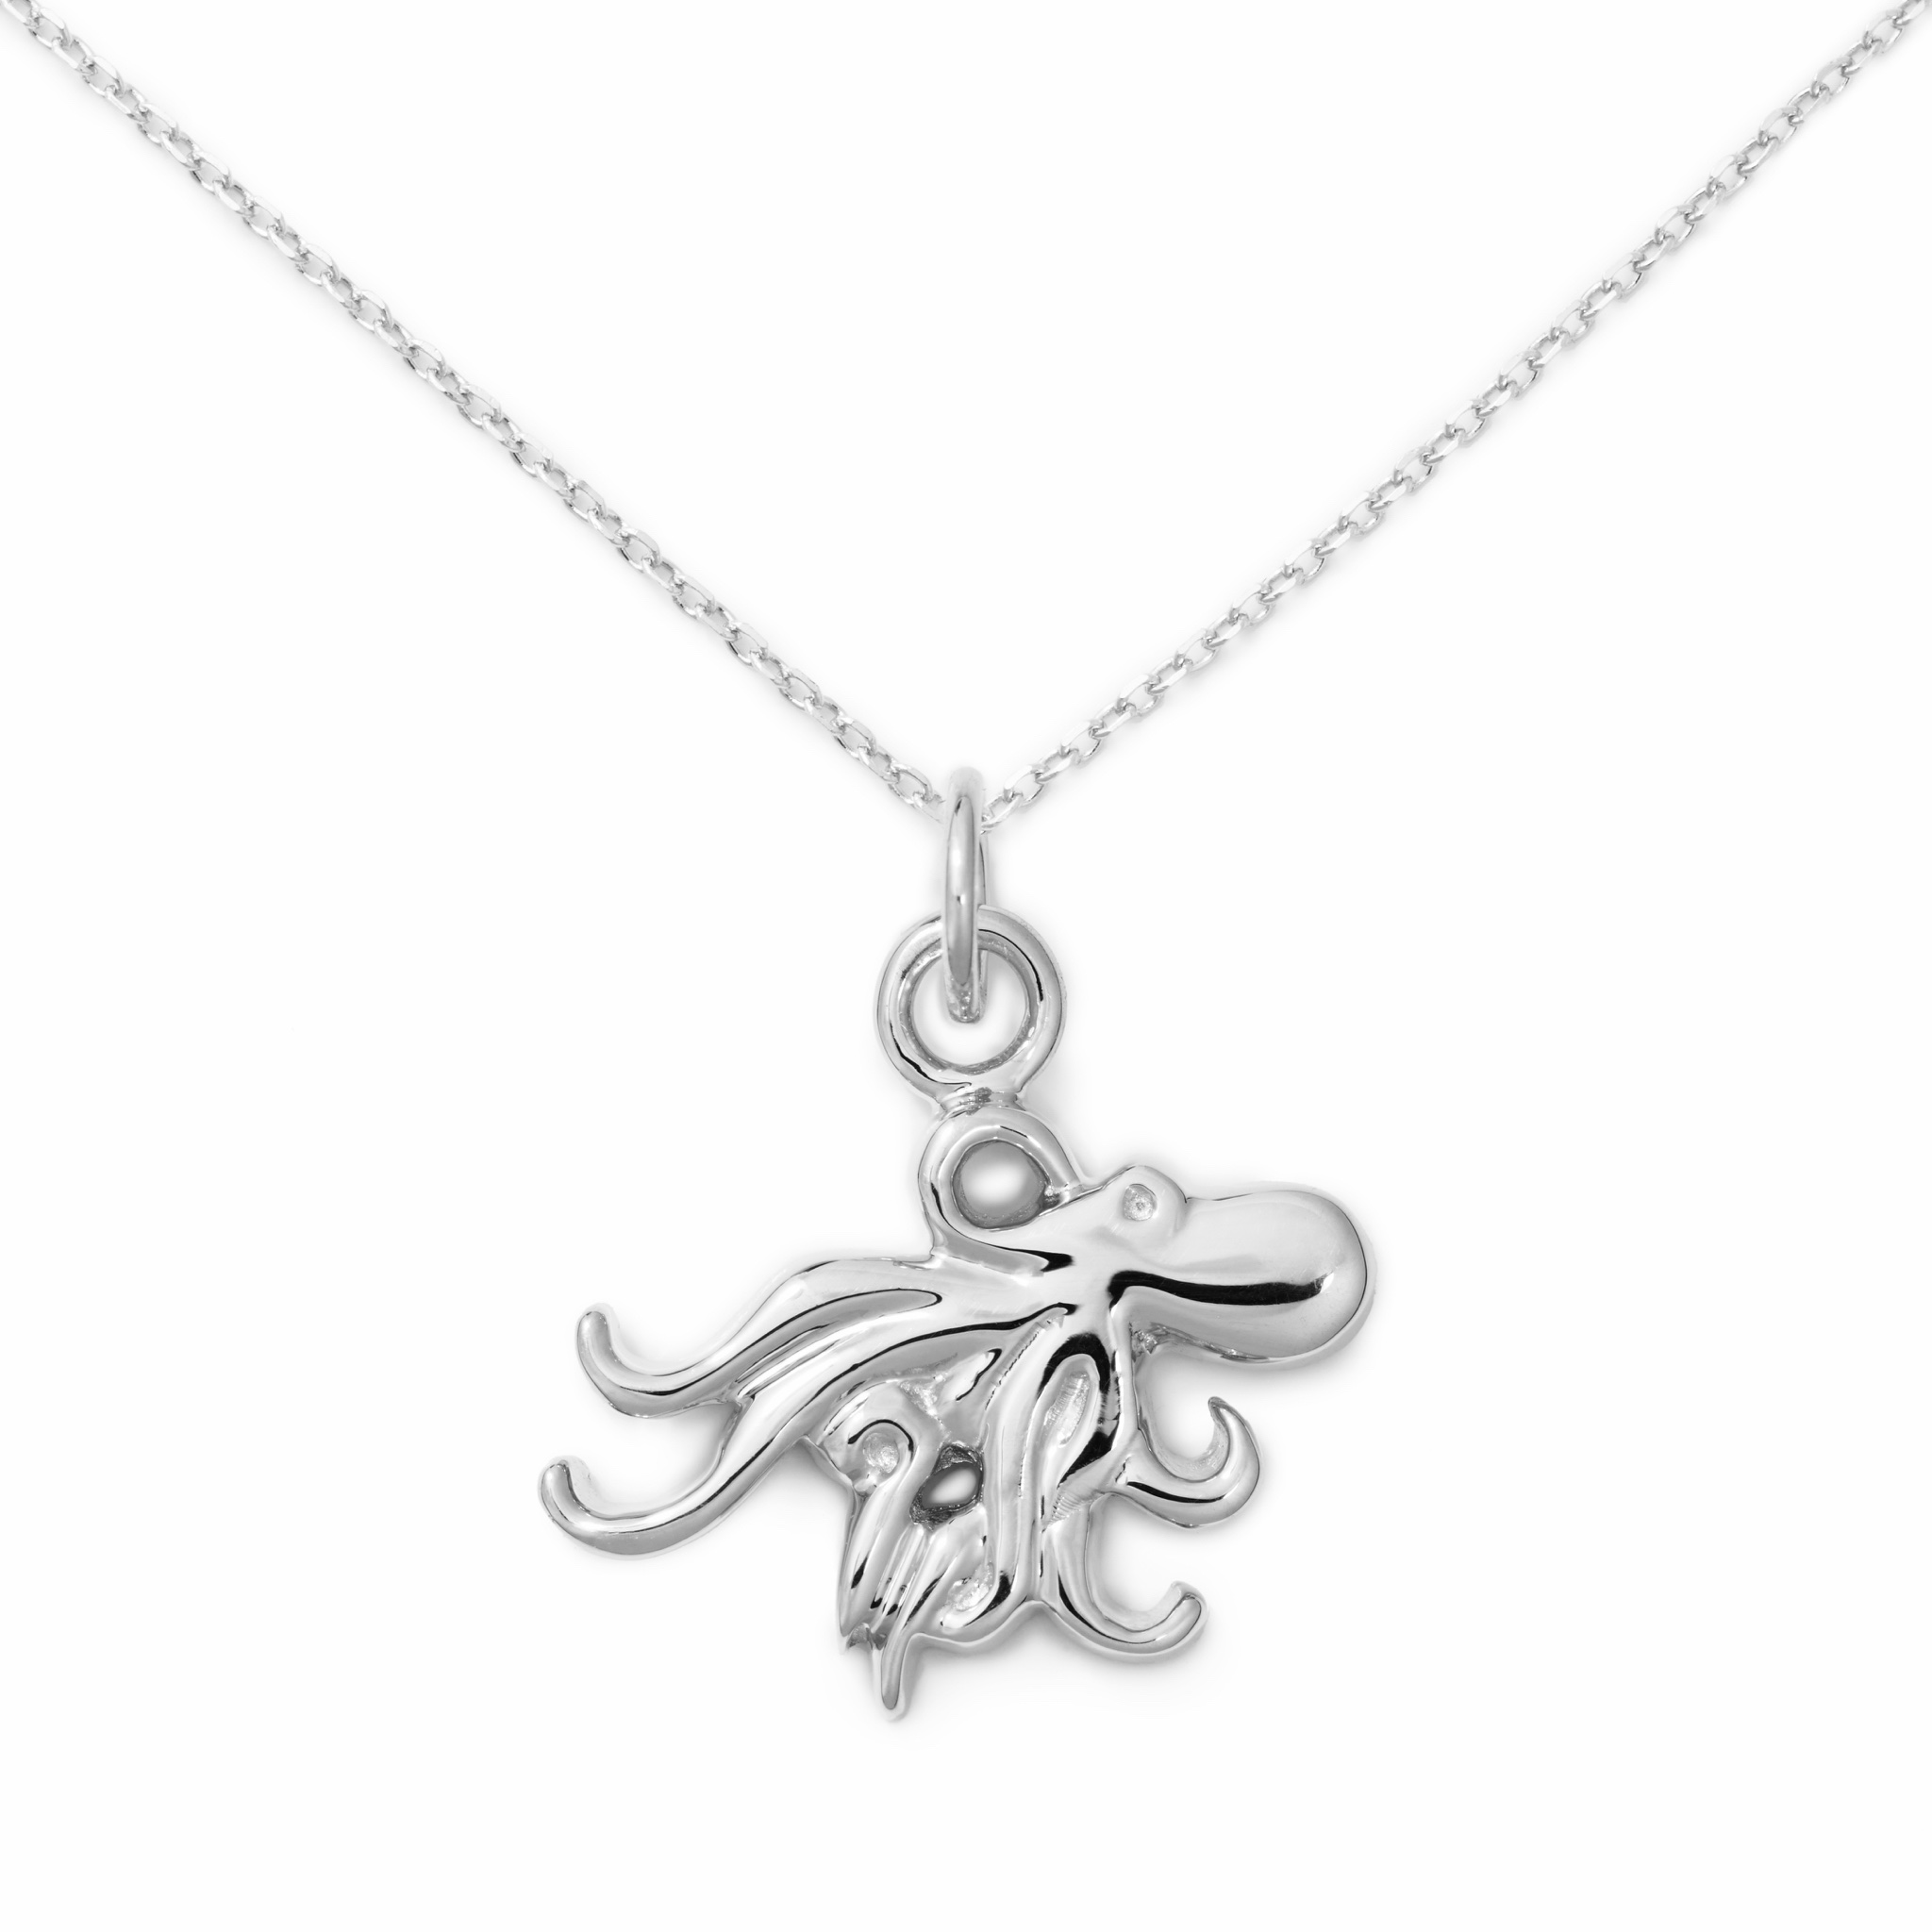 Octopus Necklace, Sterling Silver